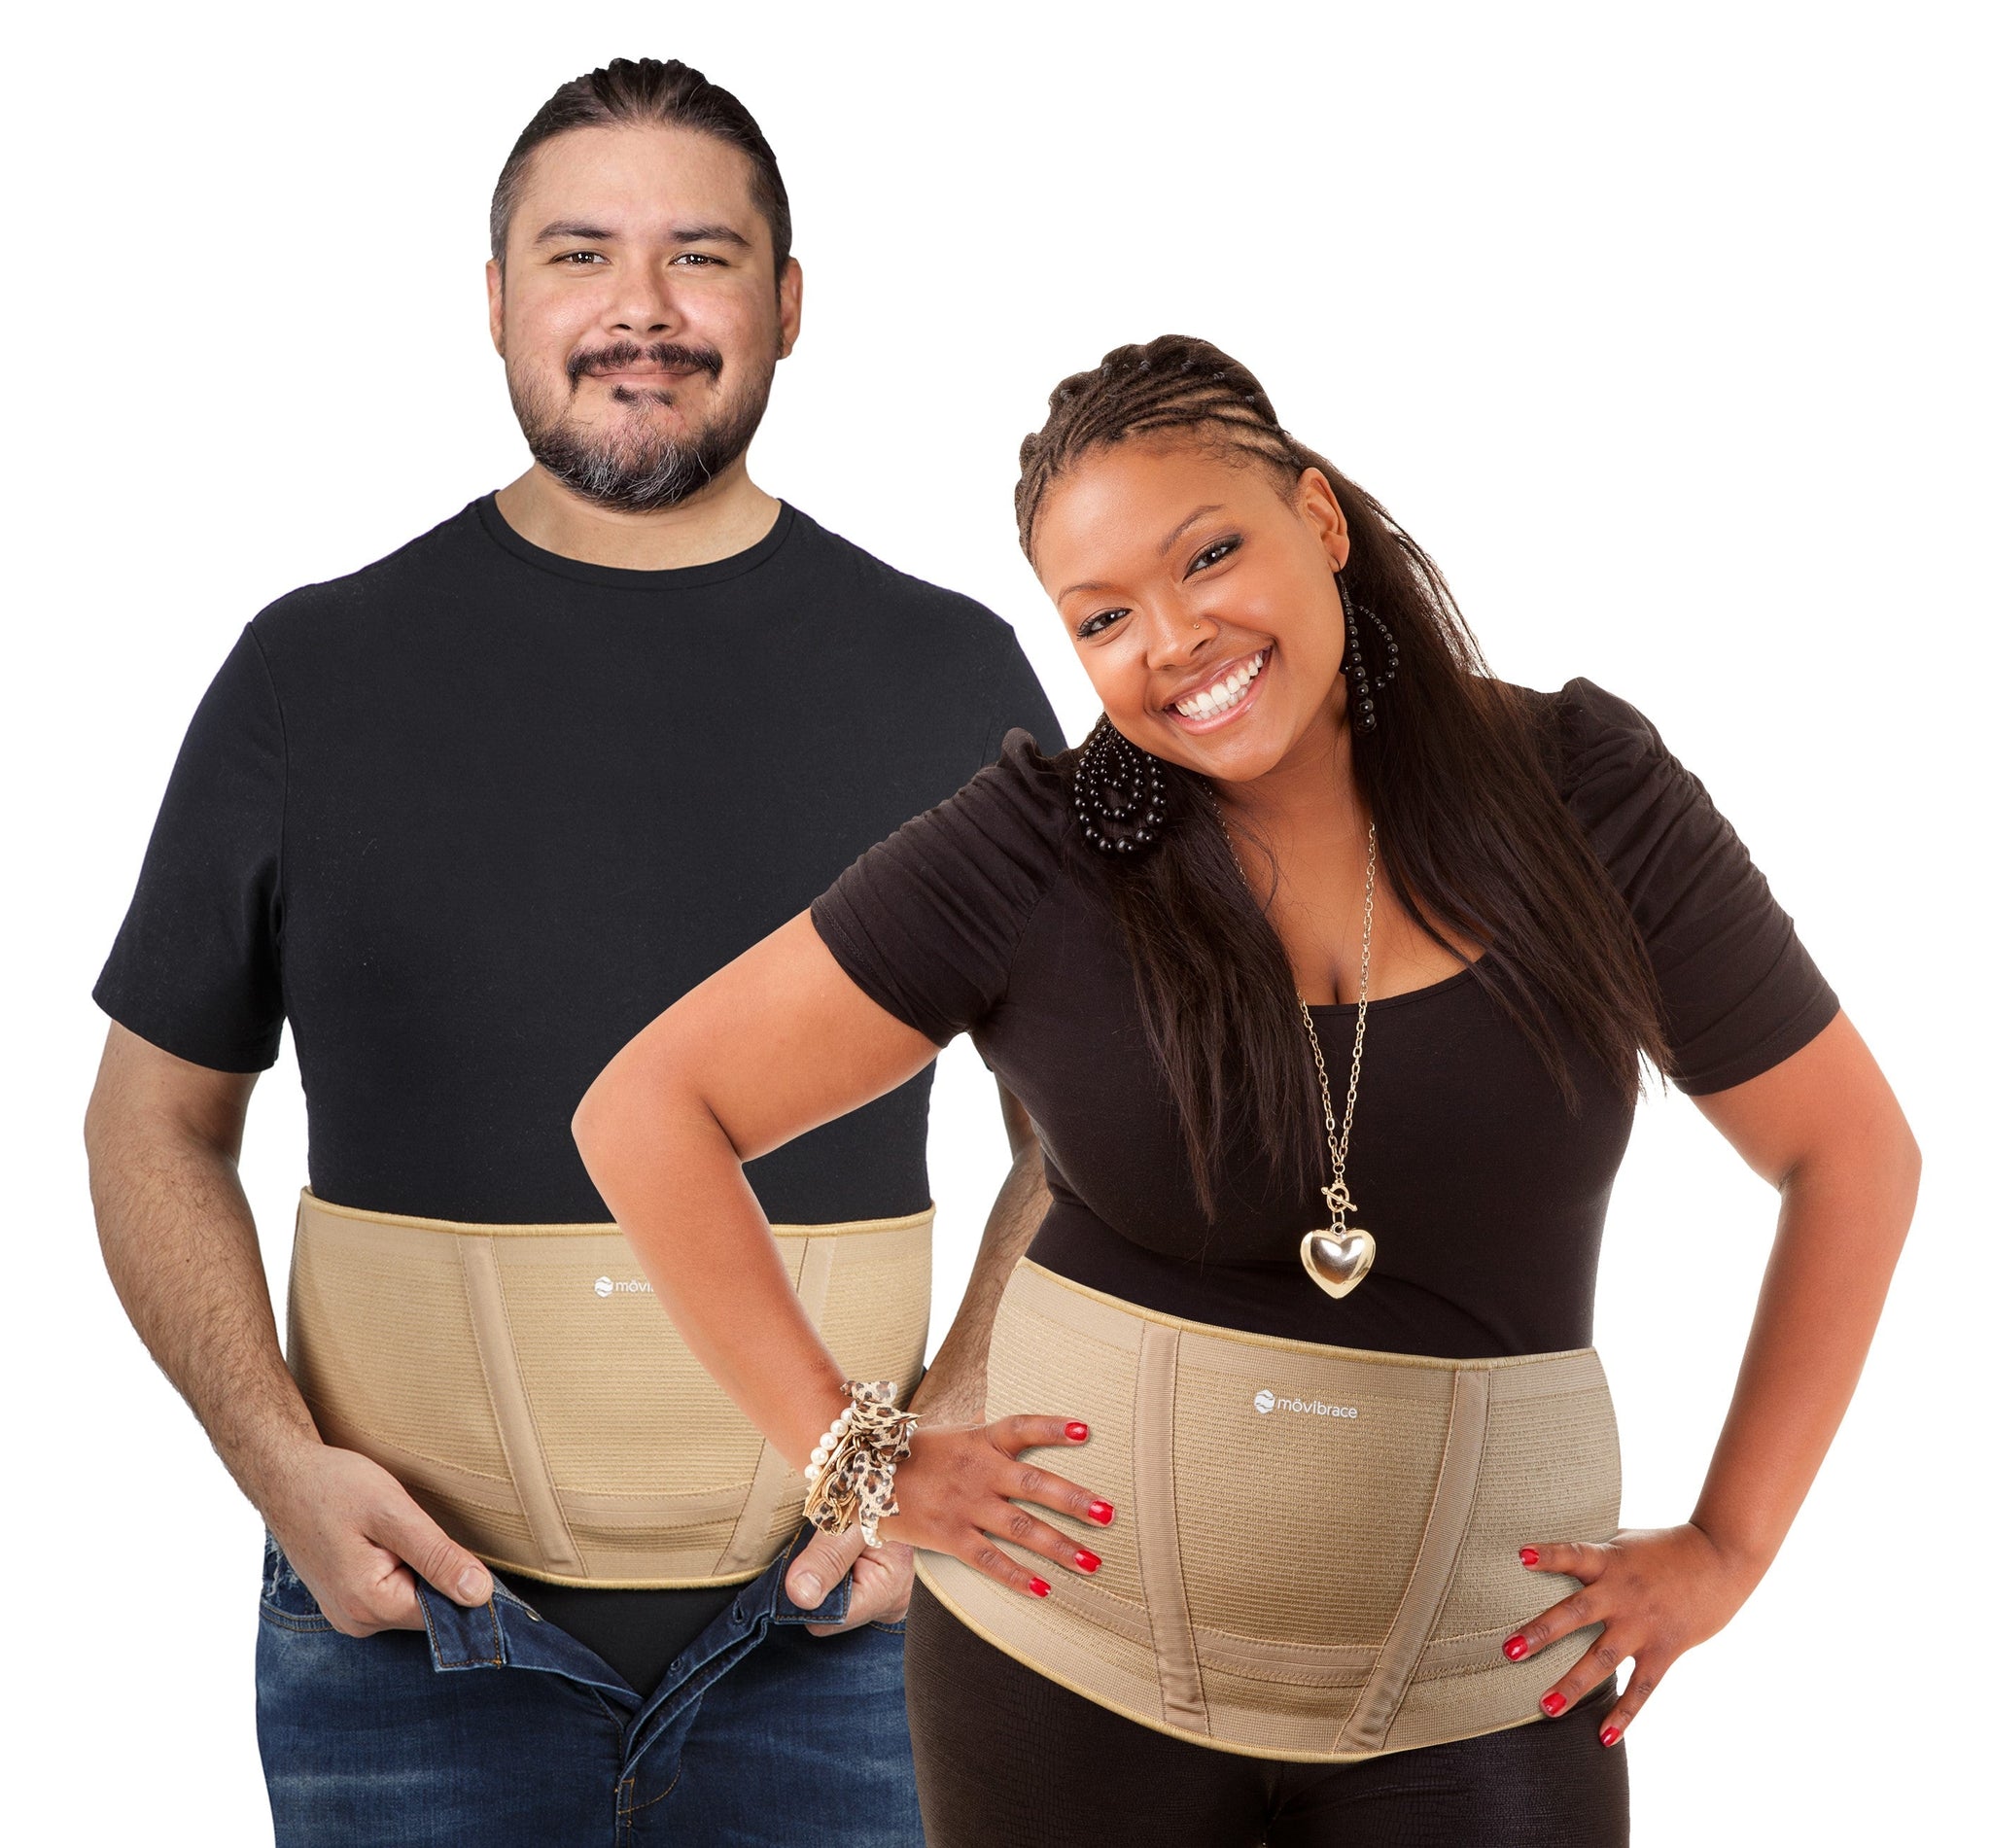 Abdominal Binder  Belly Band Stomach Hernia Support Brace & Back